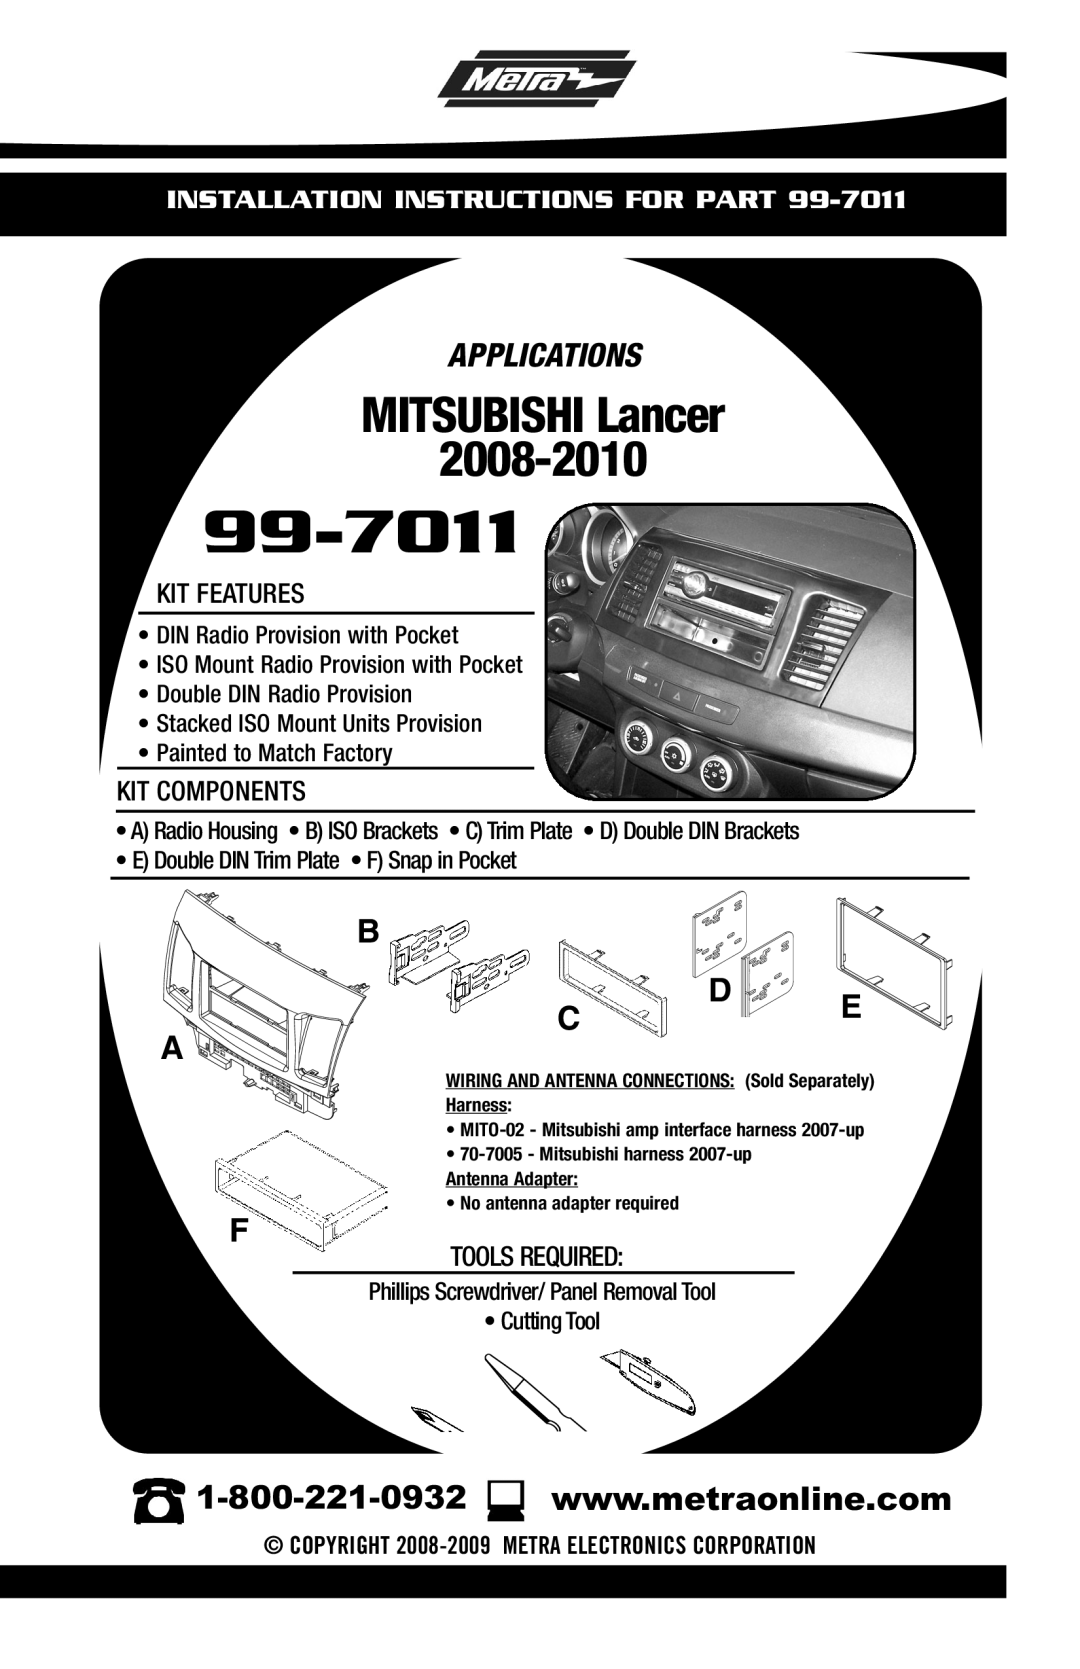 Metra Electronics 99-7011 installation instructions Applications, MITSUBISHI Lancer, Installation Instructions For Part 